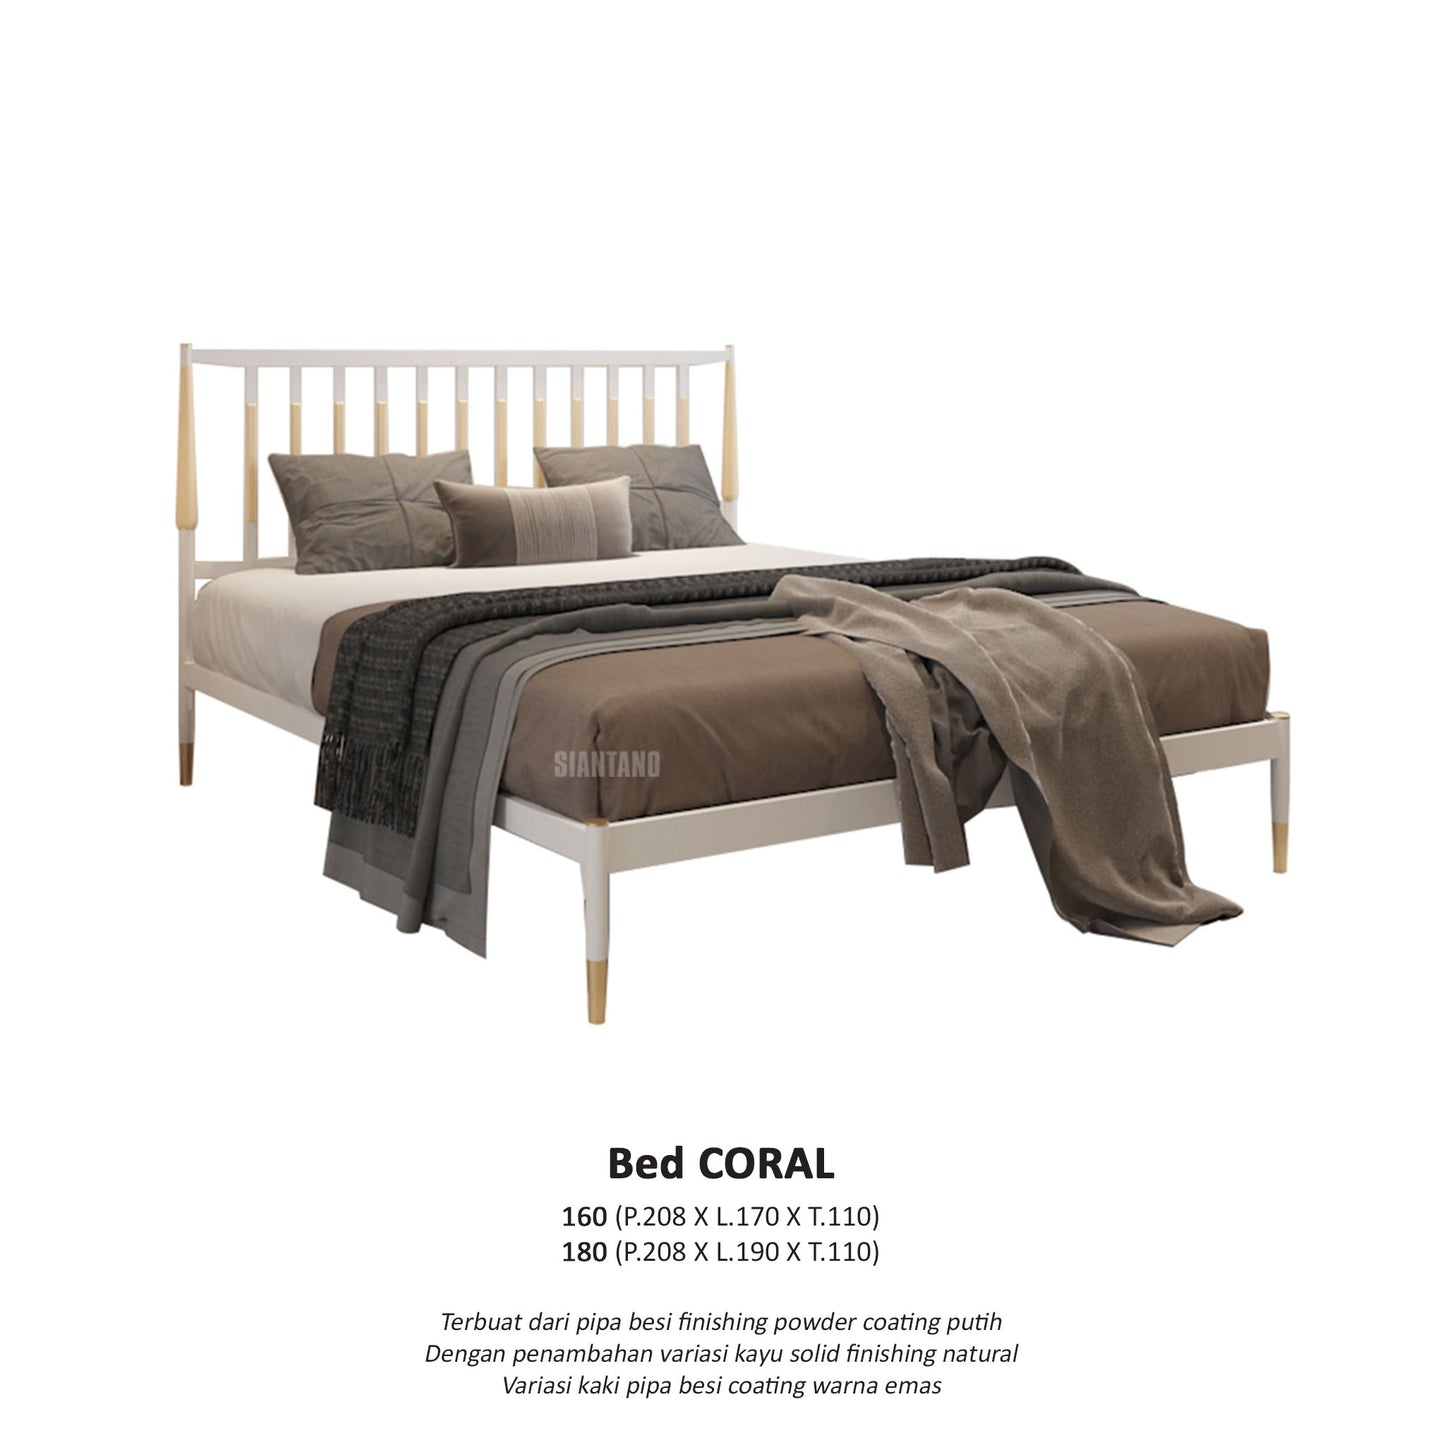 BED CORAL